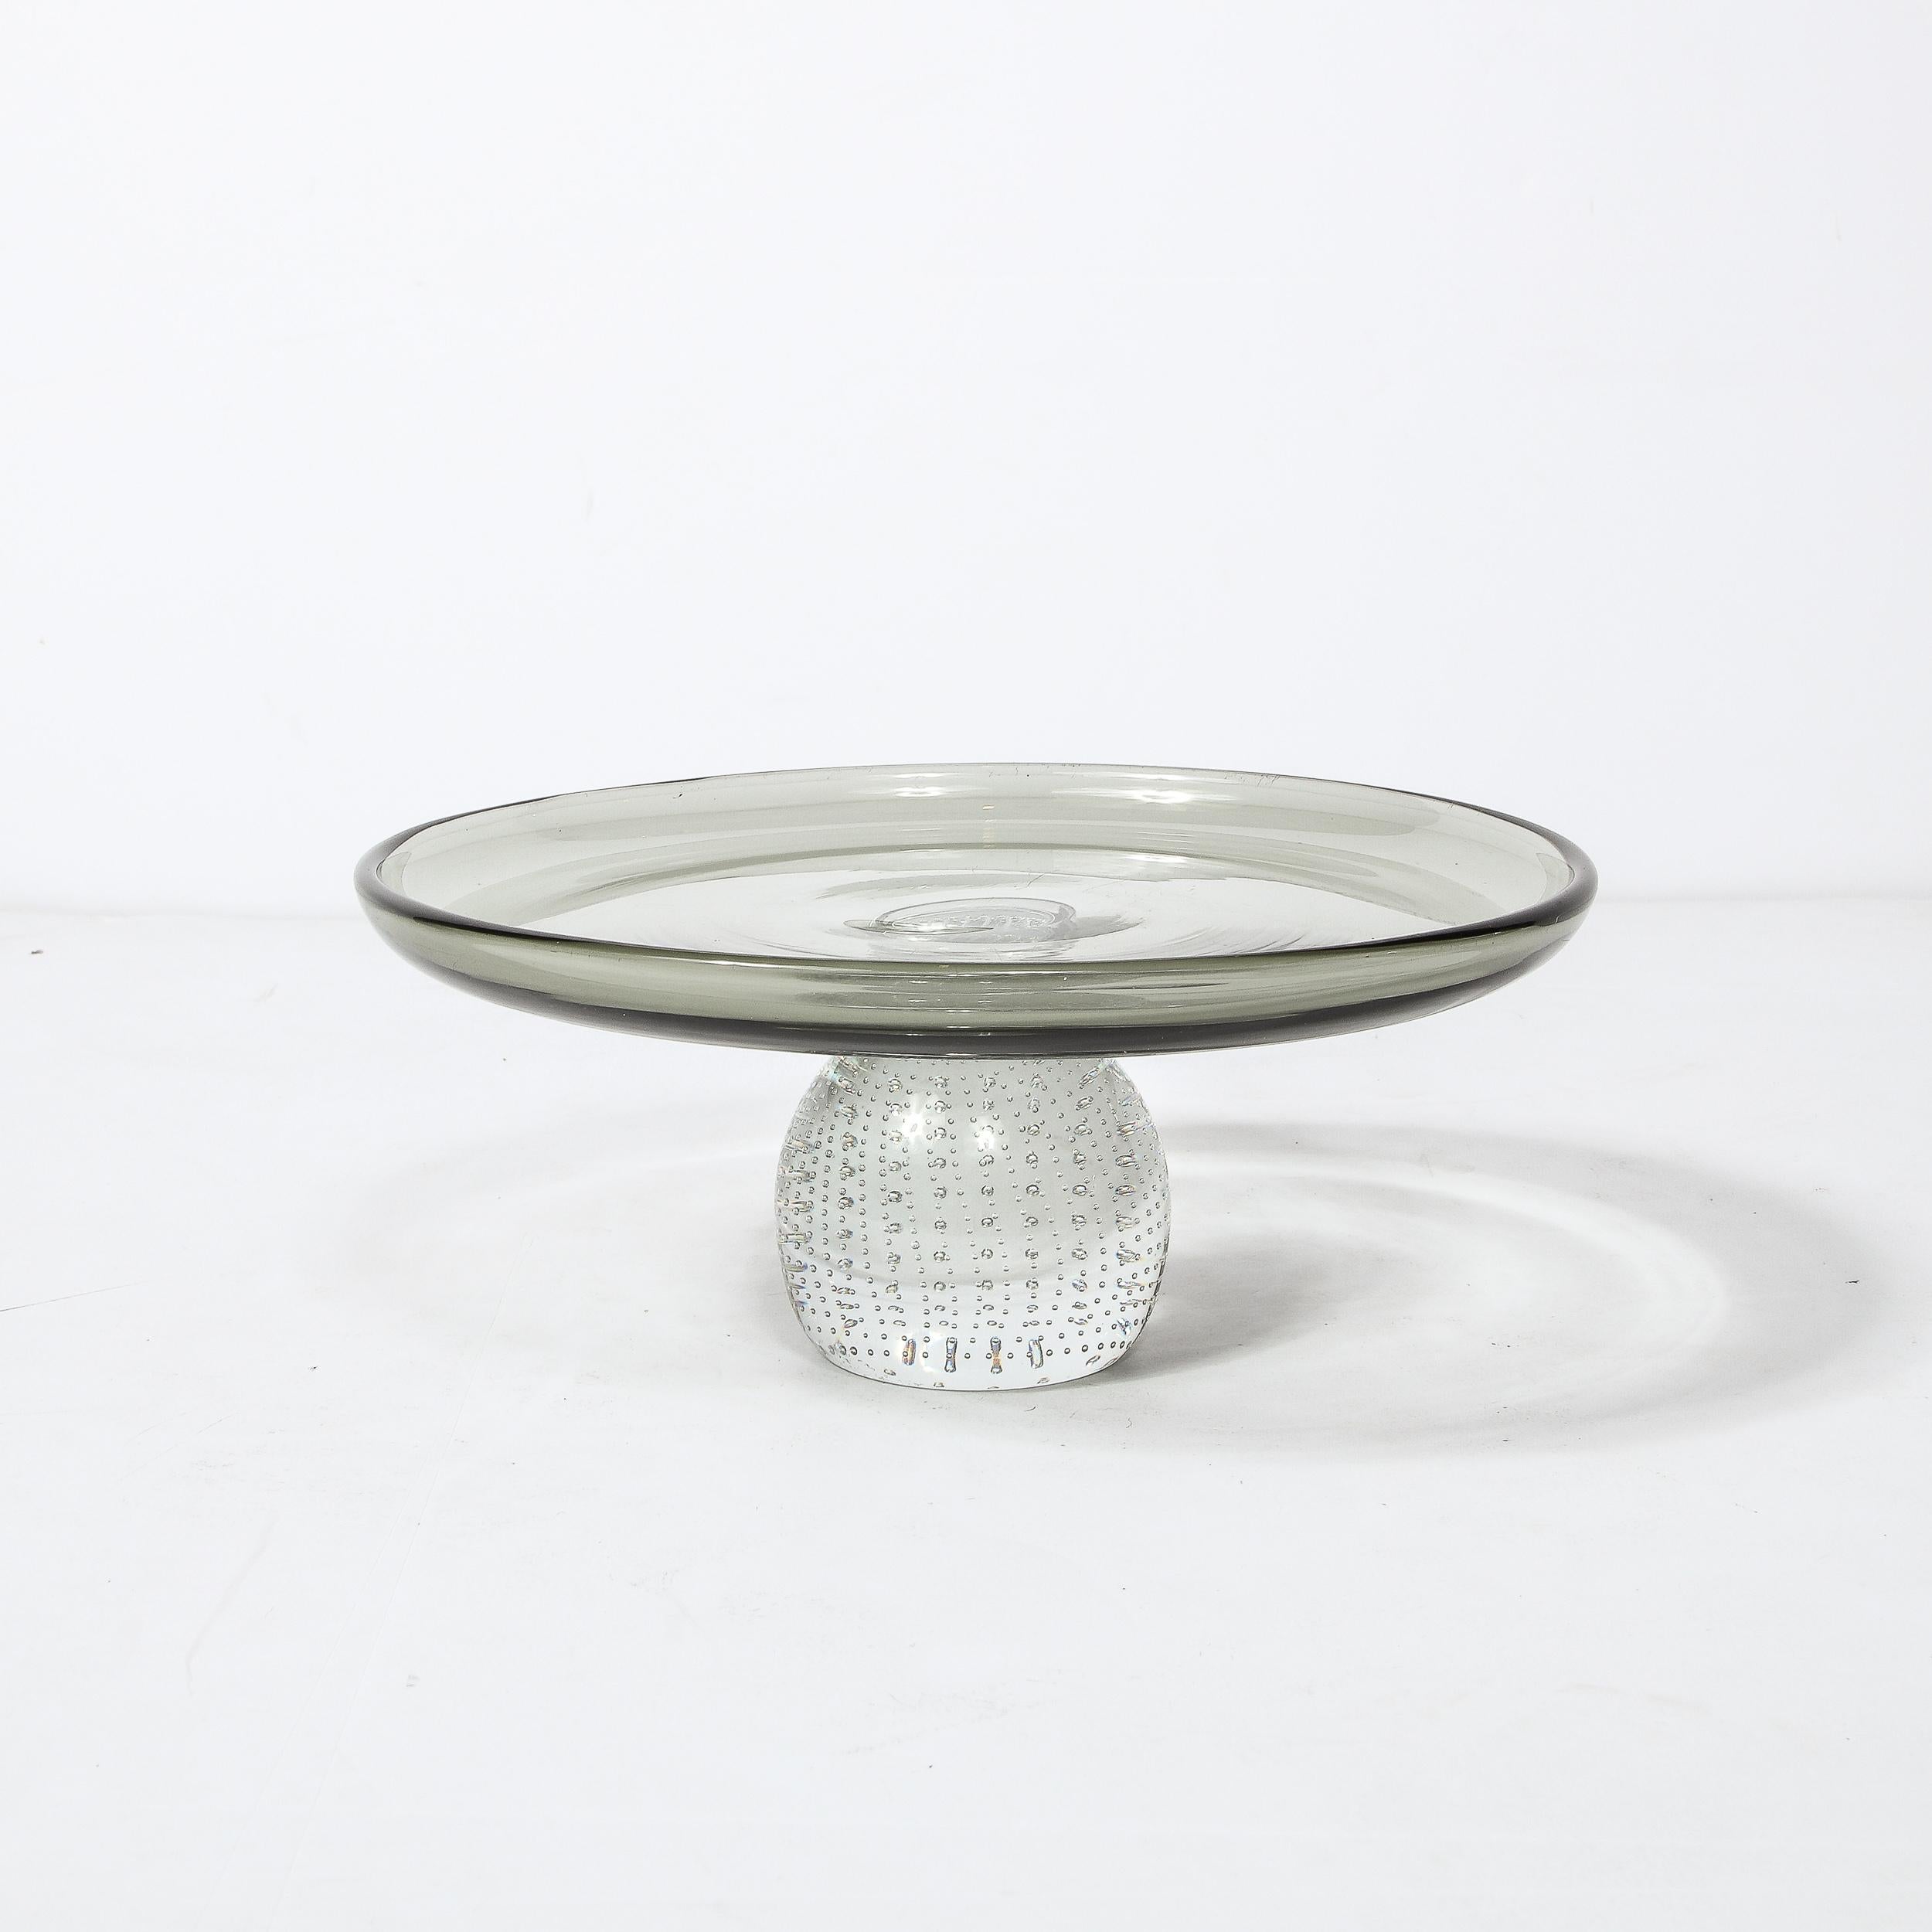 Mid-20th Century Mid-Century Modernist Glass Centerpiece w/ Precise Murine Detailing by Pairpoint For Sale